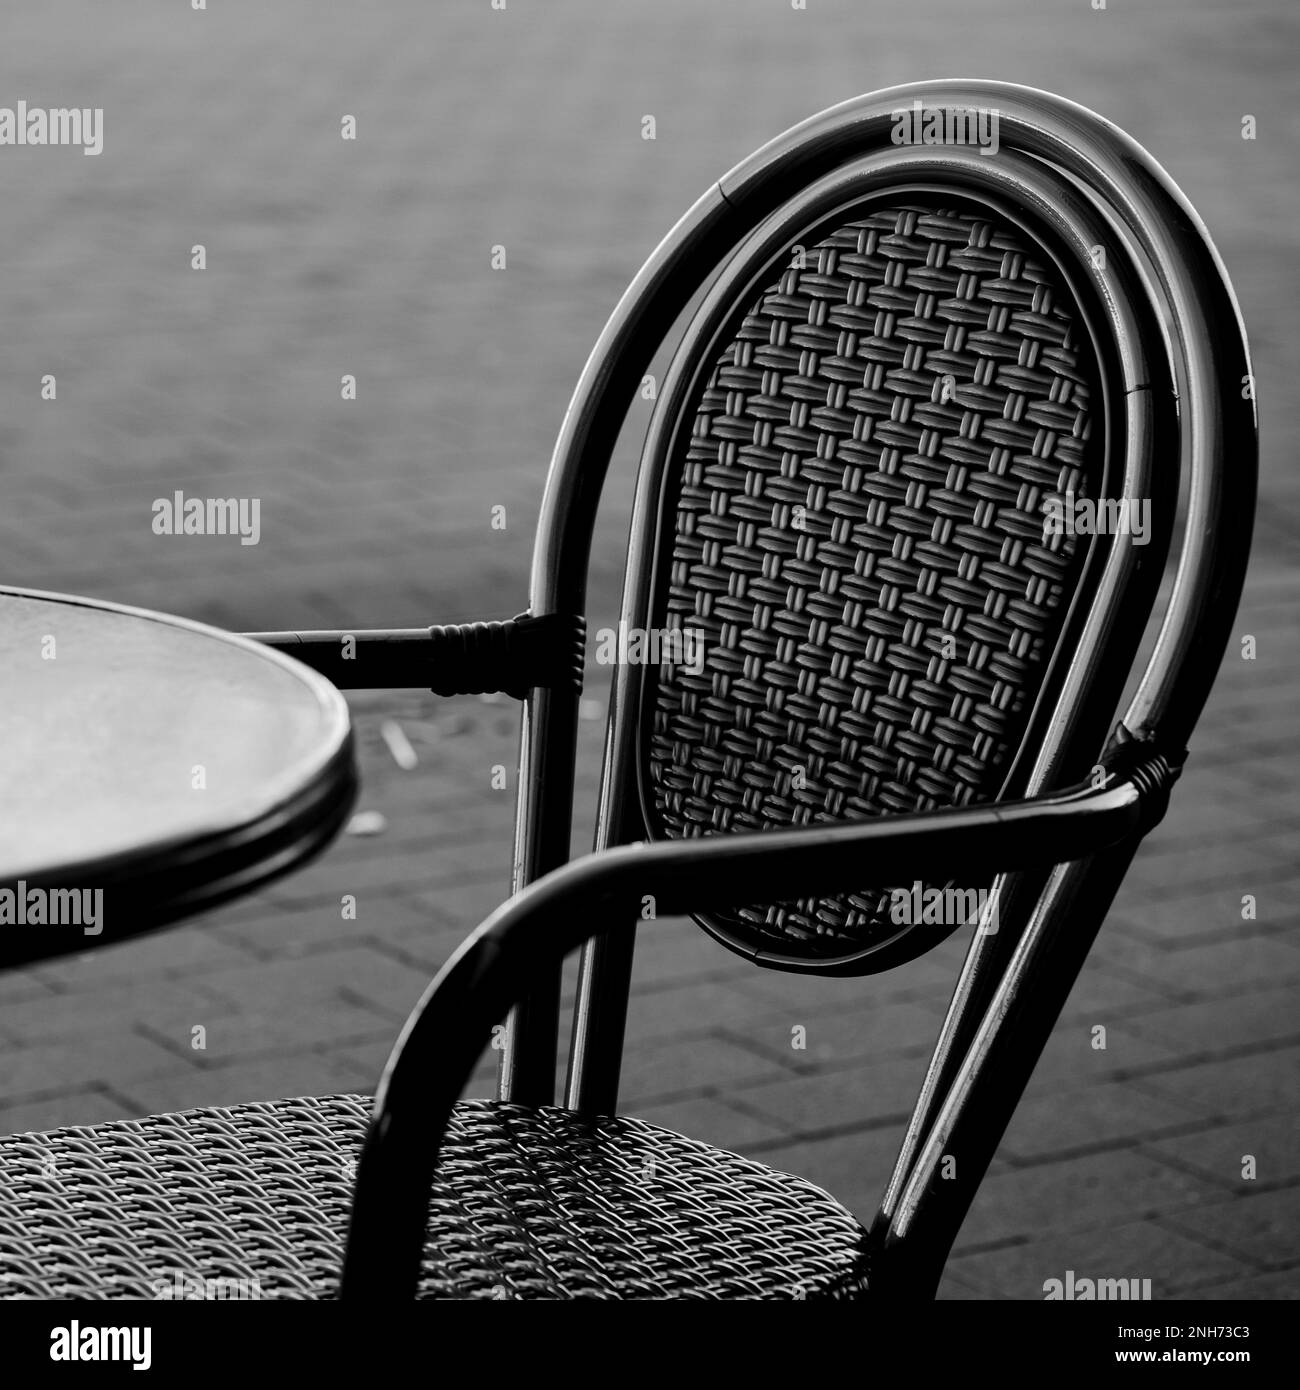 Square Format Black And White Or Monochrome Image Of A Table And Chair Outside Seating Area With No People Stock Photo